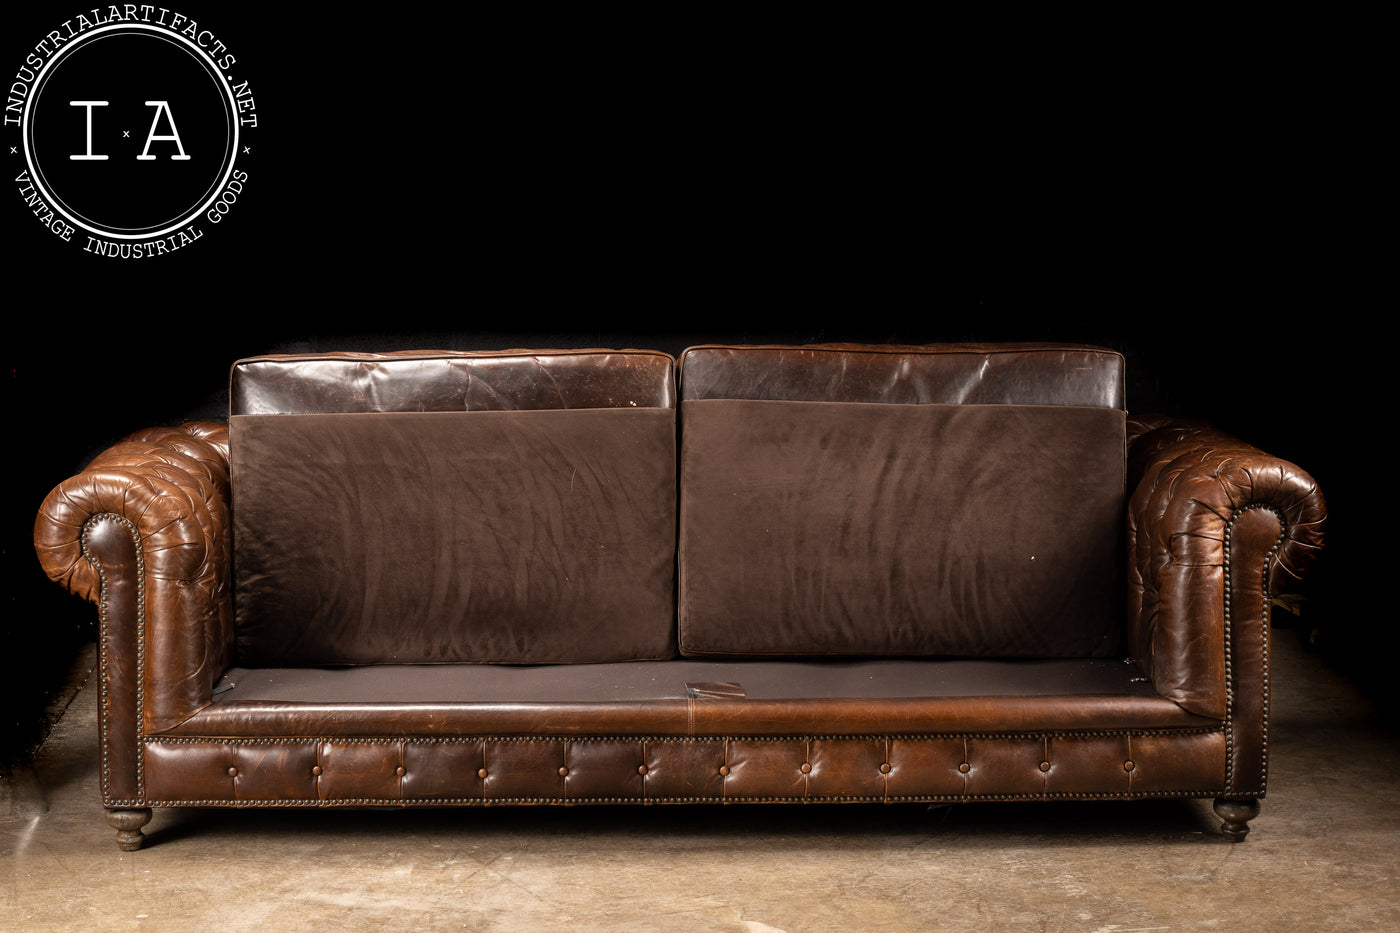 Massive Vintage Tufted Leather Chesterfield Sofa in Dark Brown